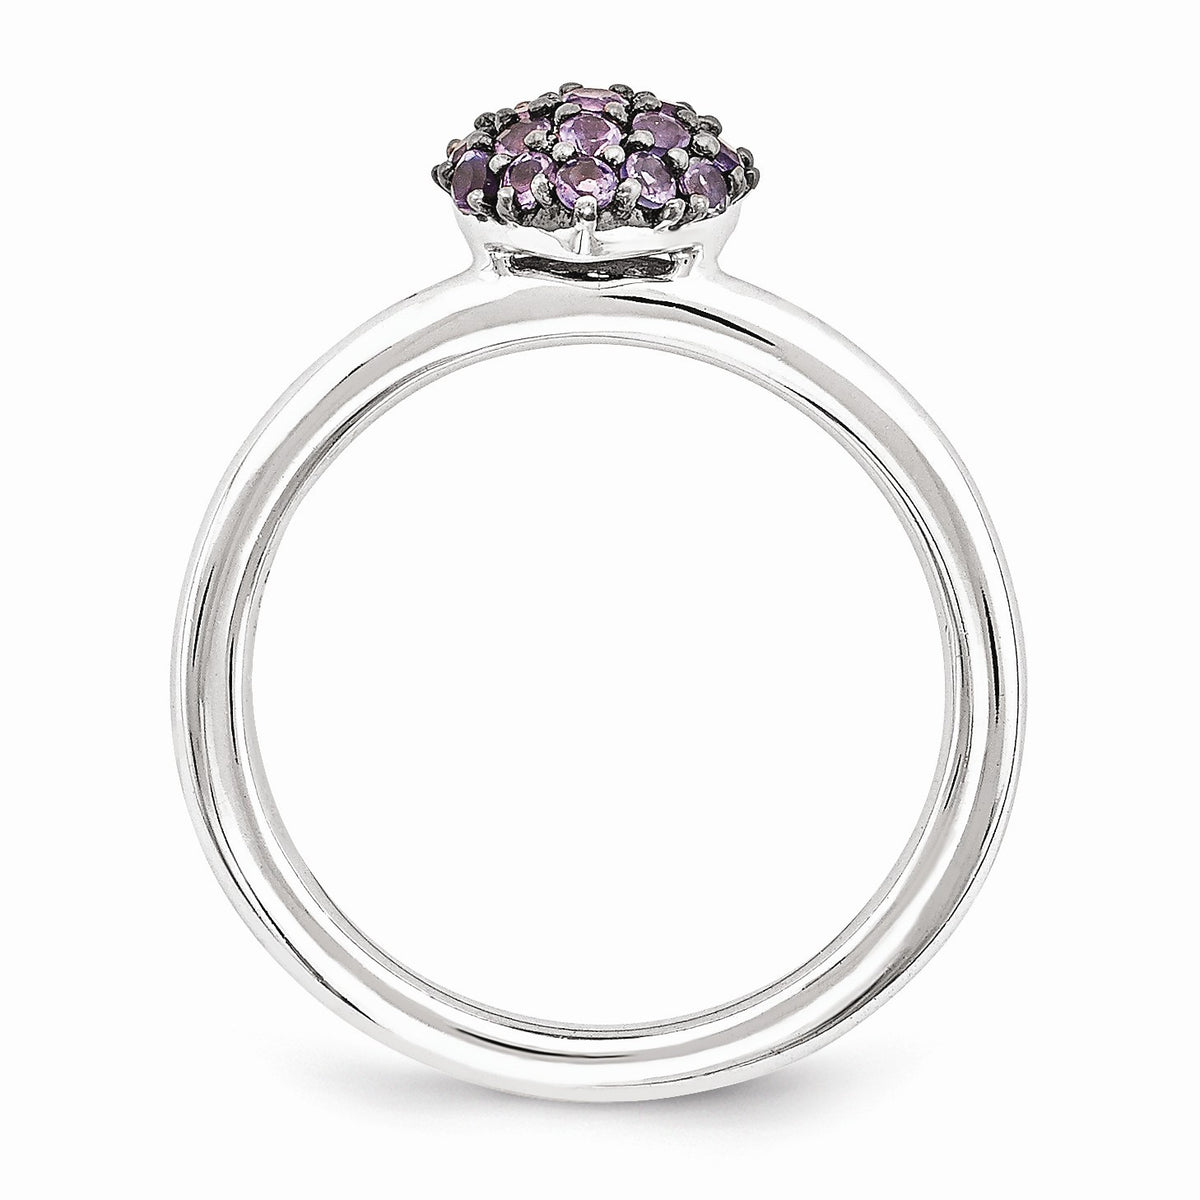 Alternate view of the Sterling Silver Amethyst Cluster Stackable Expressions 8mm Heart Ring by The Black Bow Jewelry Co.